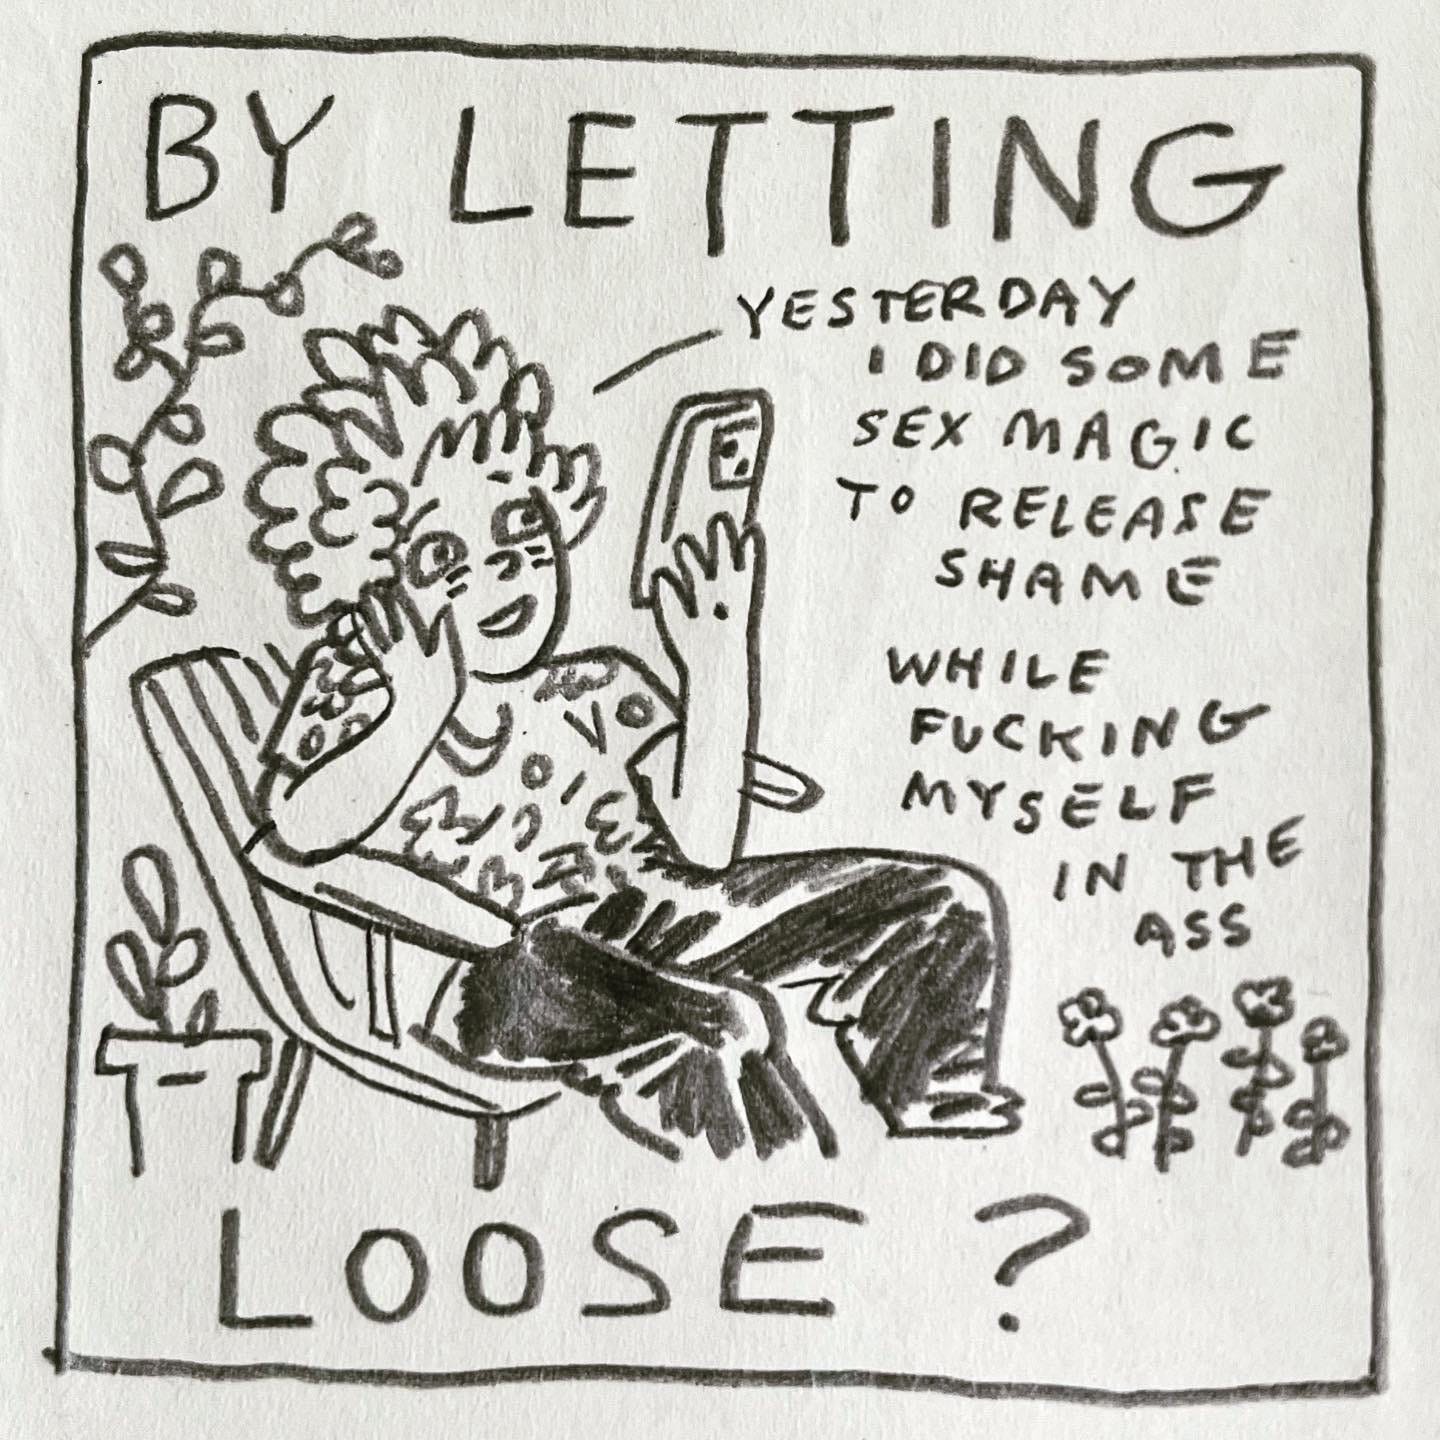 Panel 4: by letting loose? Image: Lark, blushing and smiling, leans on their hand in a lawn chair surrounded by plants. They are speaking to their phone. "Yesterday I did some sex magic to release shame while fucking myself in the ass"